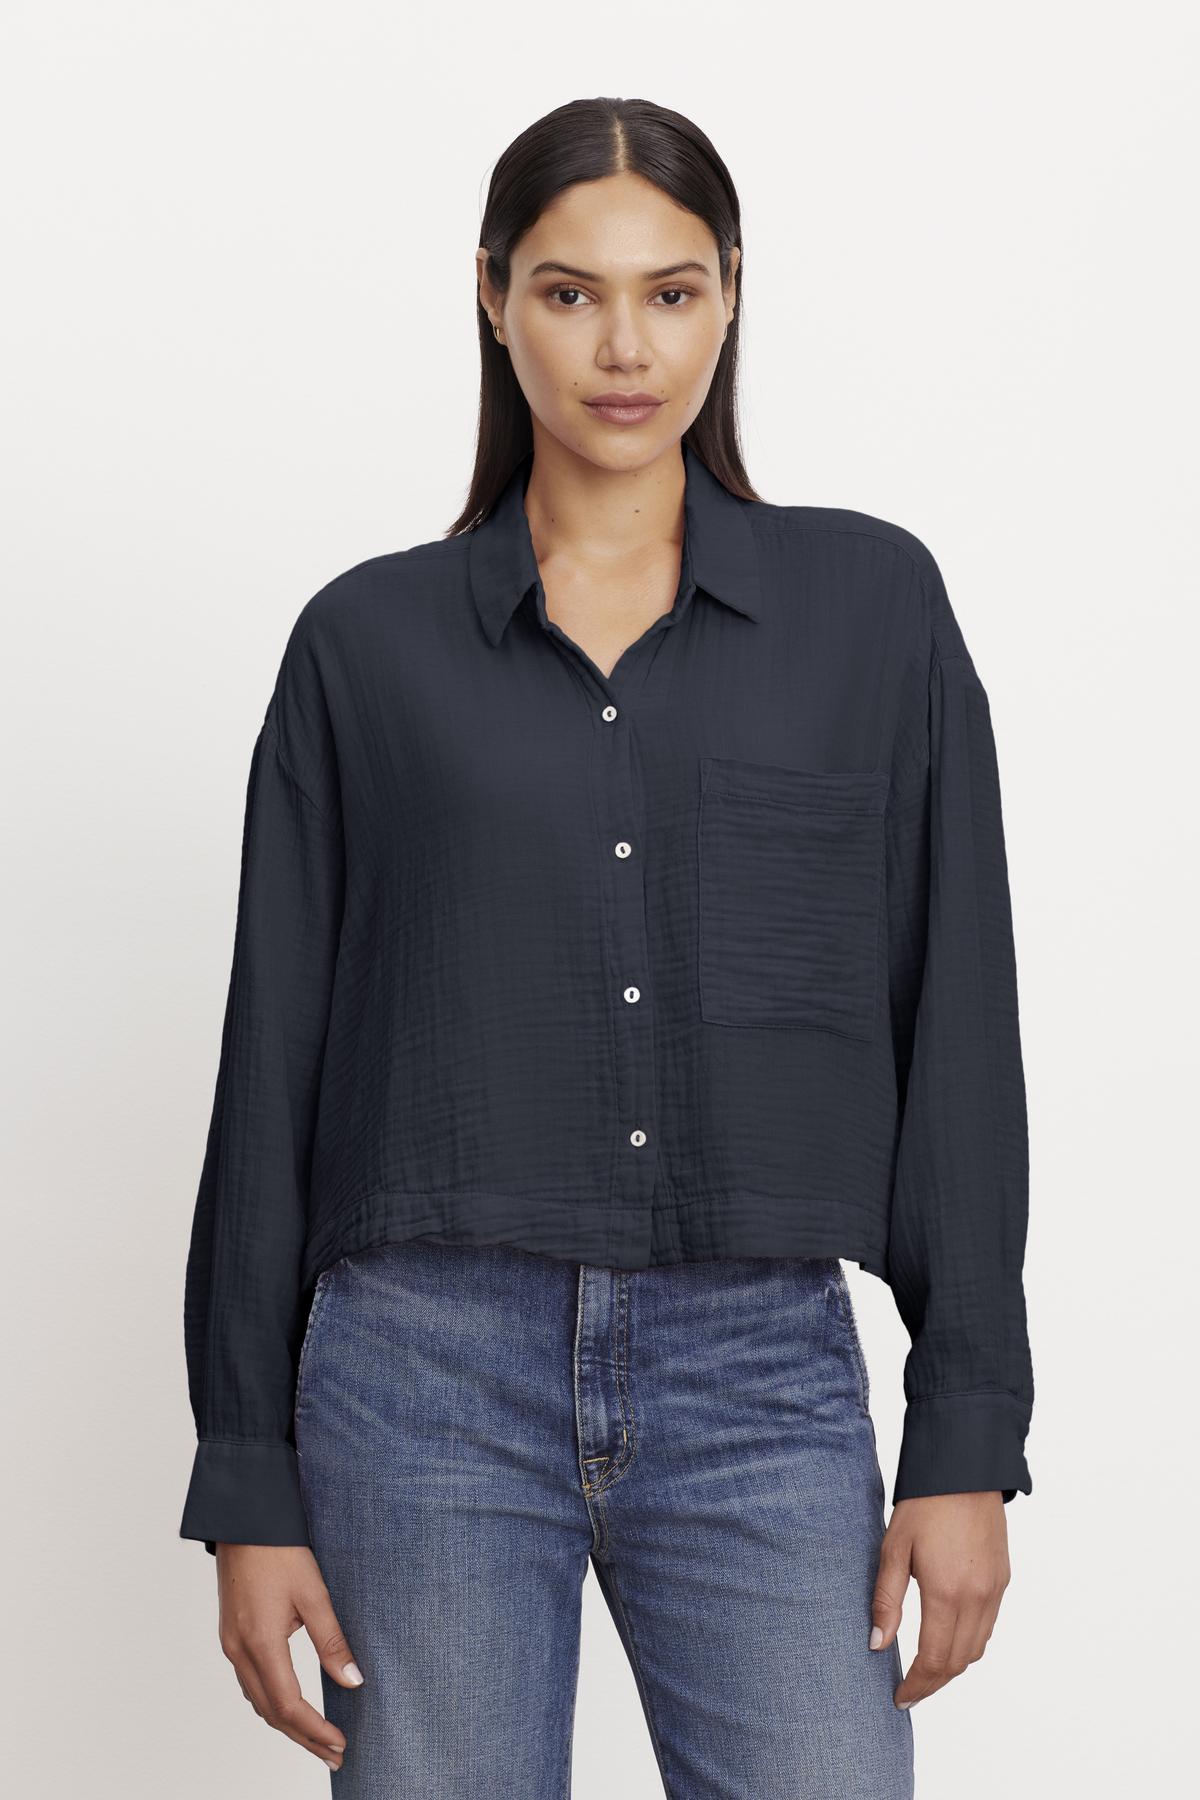 Woman in a casual black LANA COTTON GAUZE BUTTON-UP SHIRT and blue jeans by Velvet by Graham & Spencer.-36462890221761